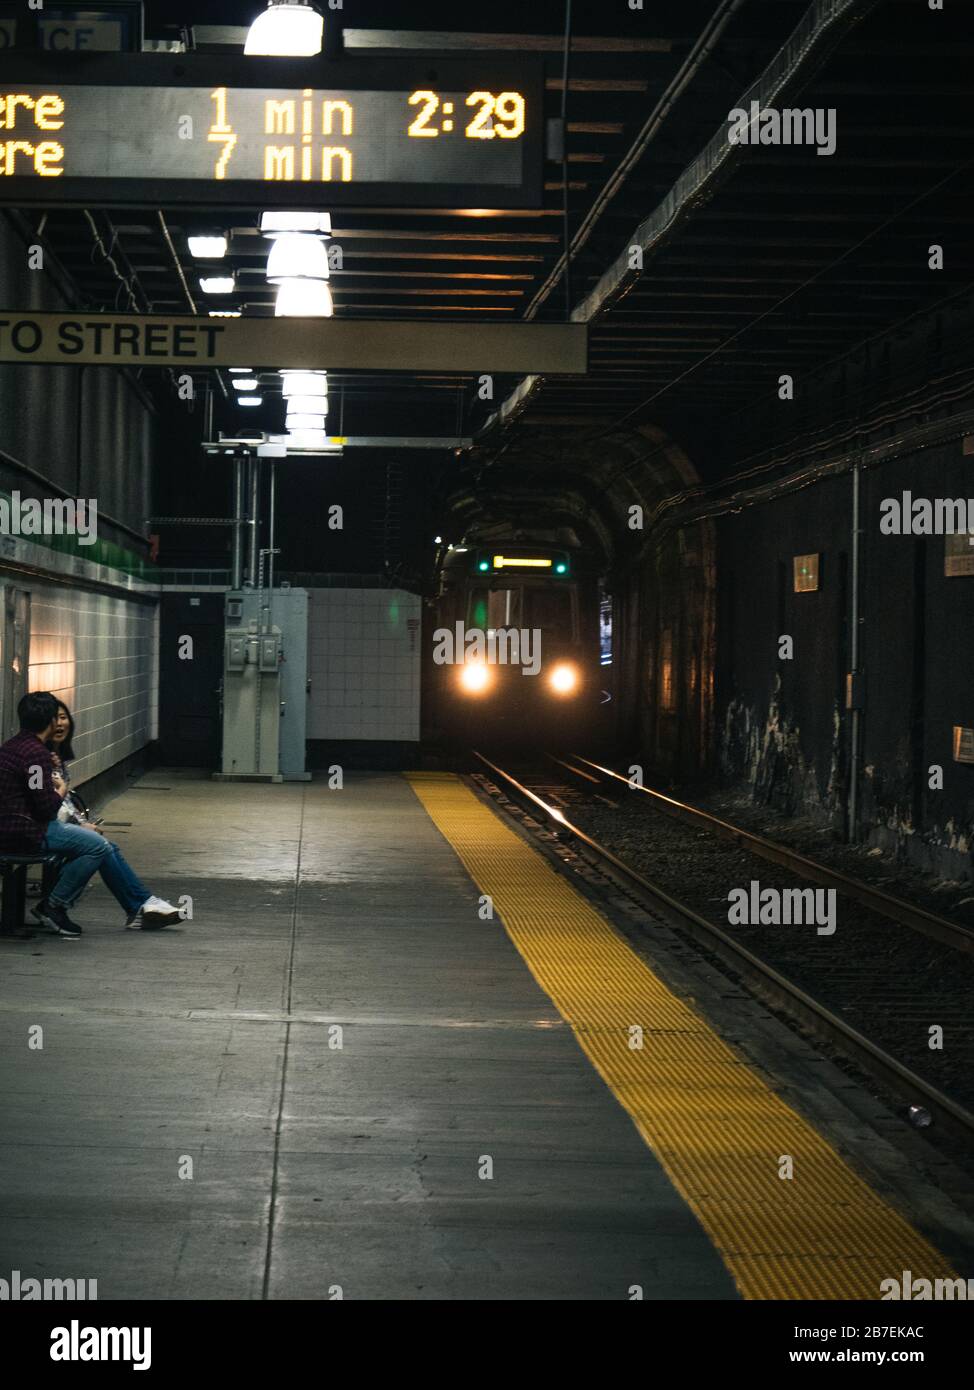 Man and a woman sitting and talking on a bench in a subway with upcoming train Stock Photo